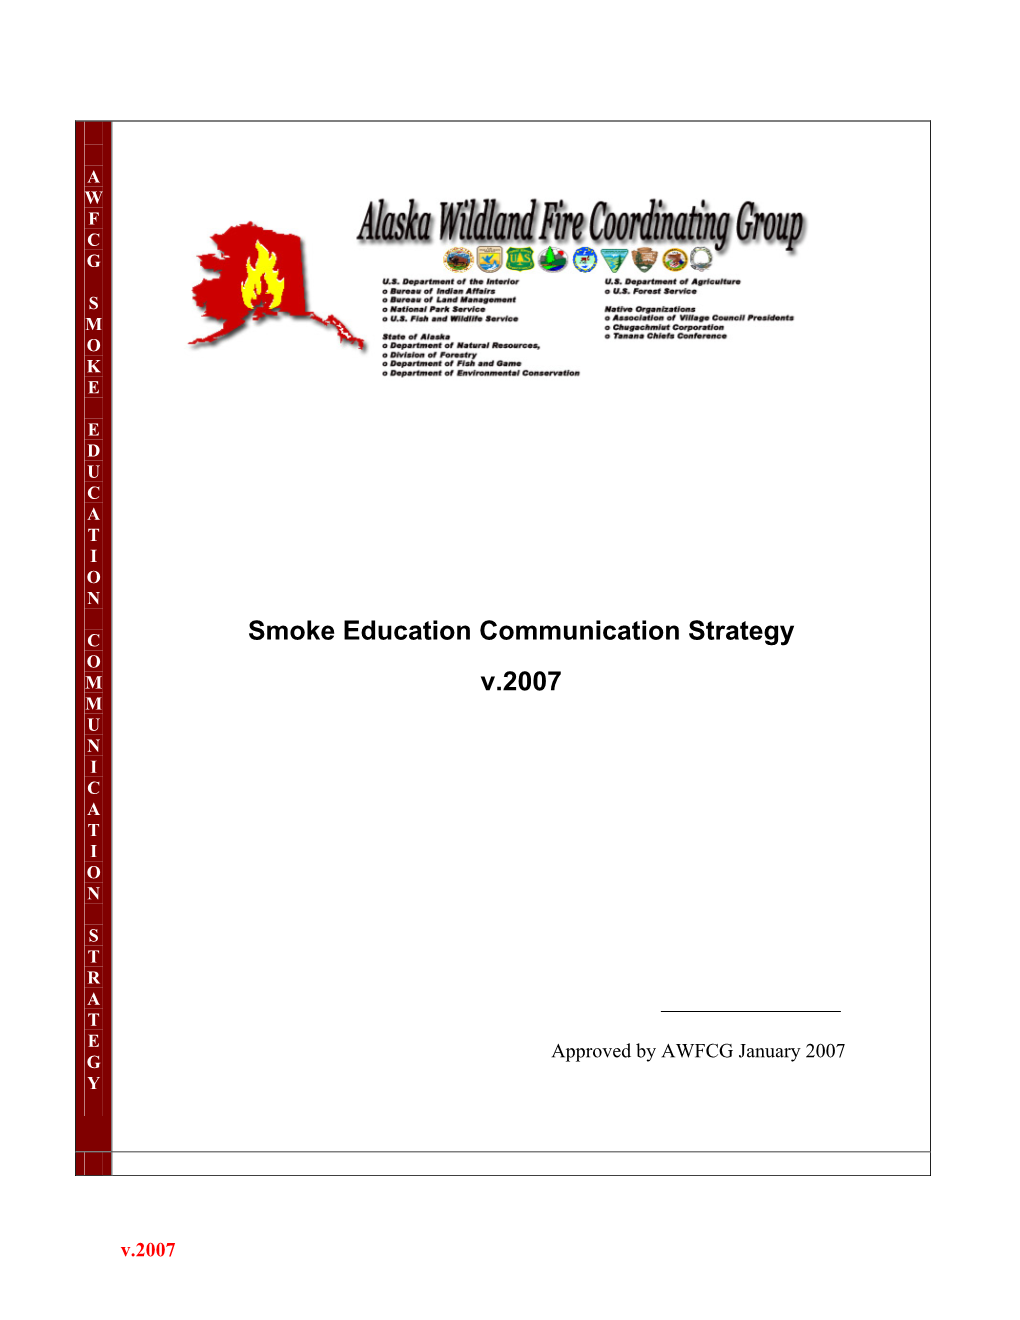 Smoke Communication Strategy and Appendices 2007